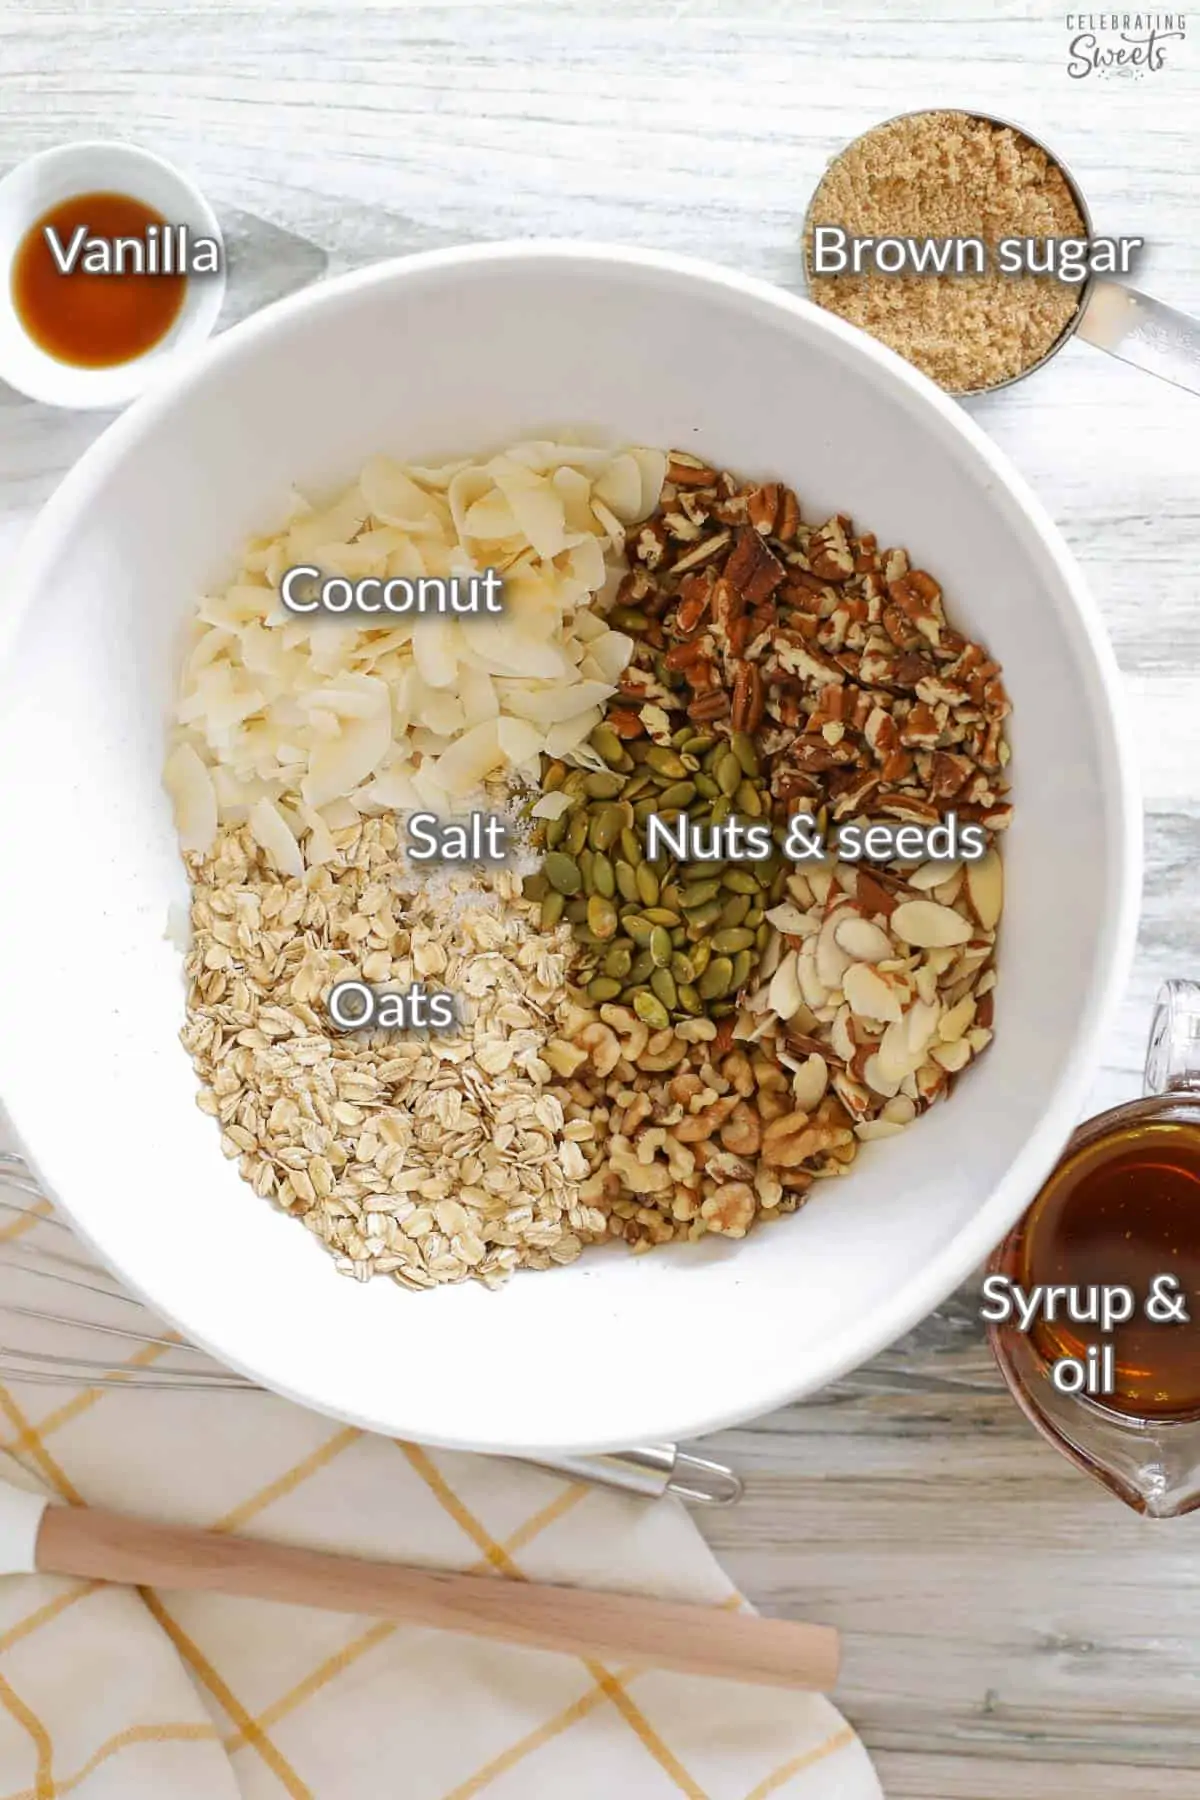 Ingredients for homemade granola: oats, nuts, sugar, oil, vanilla.